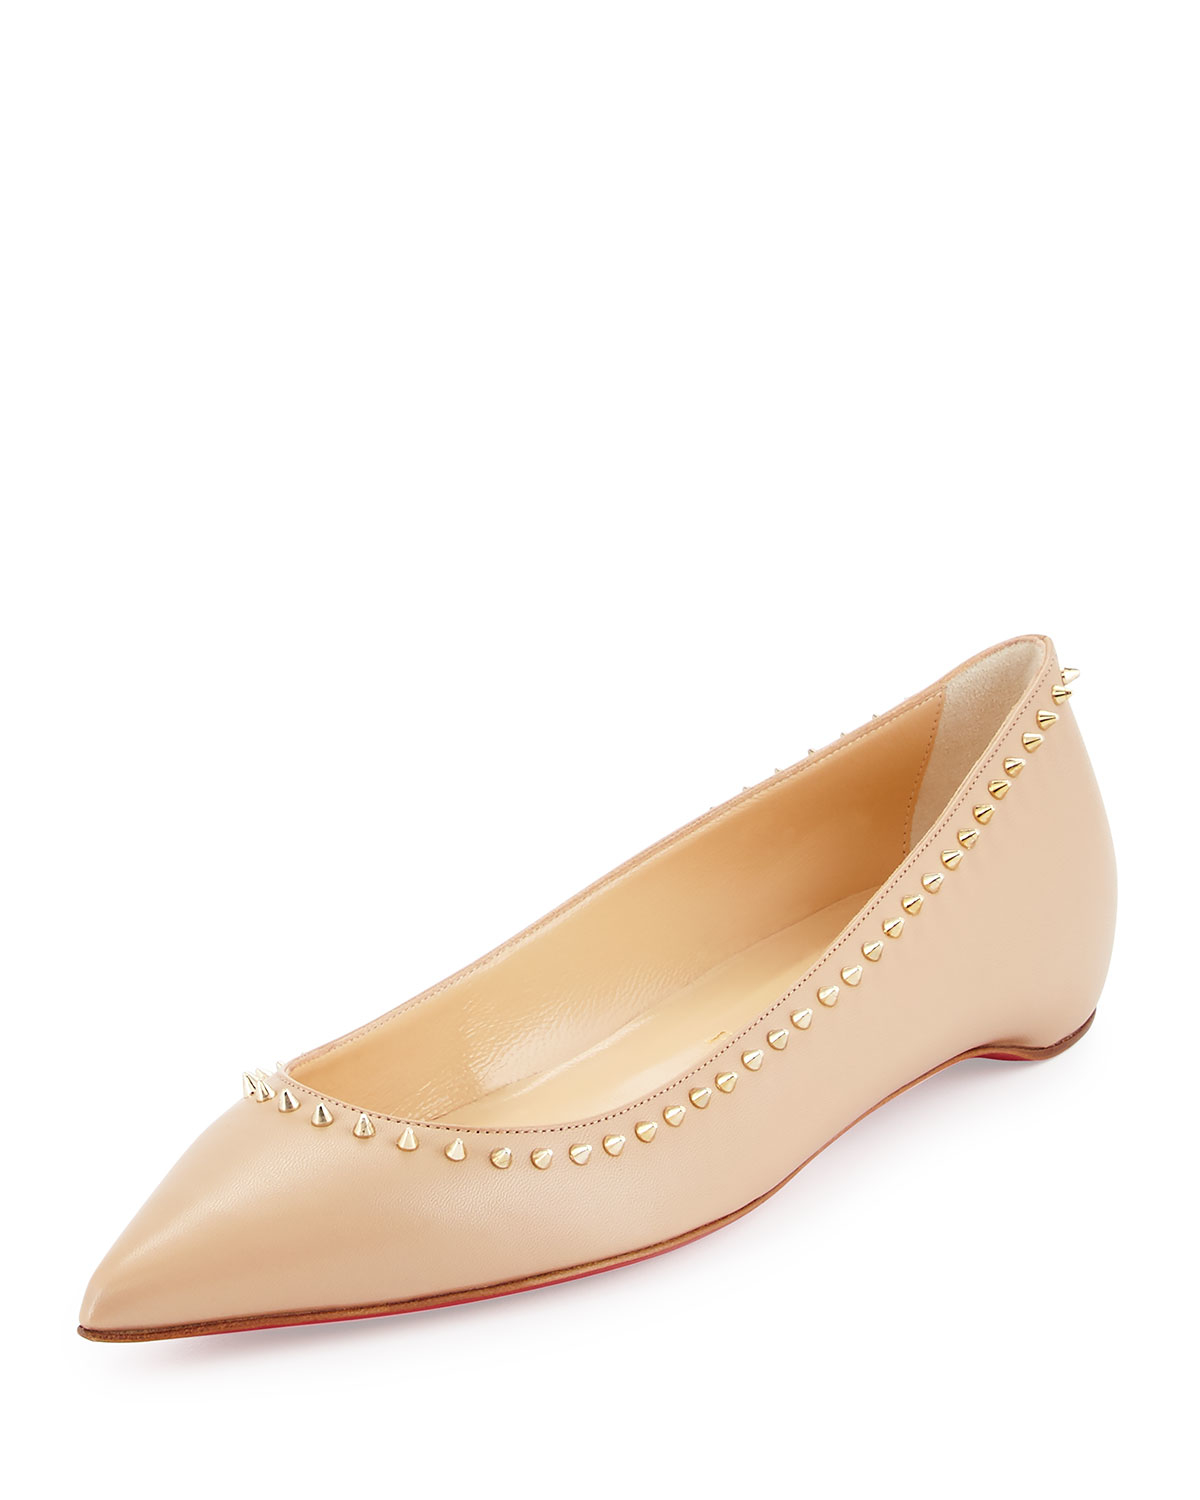 Christian louboutin Anjalina Studded Leather Ballet Flats in Beige ...  